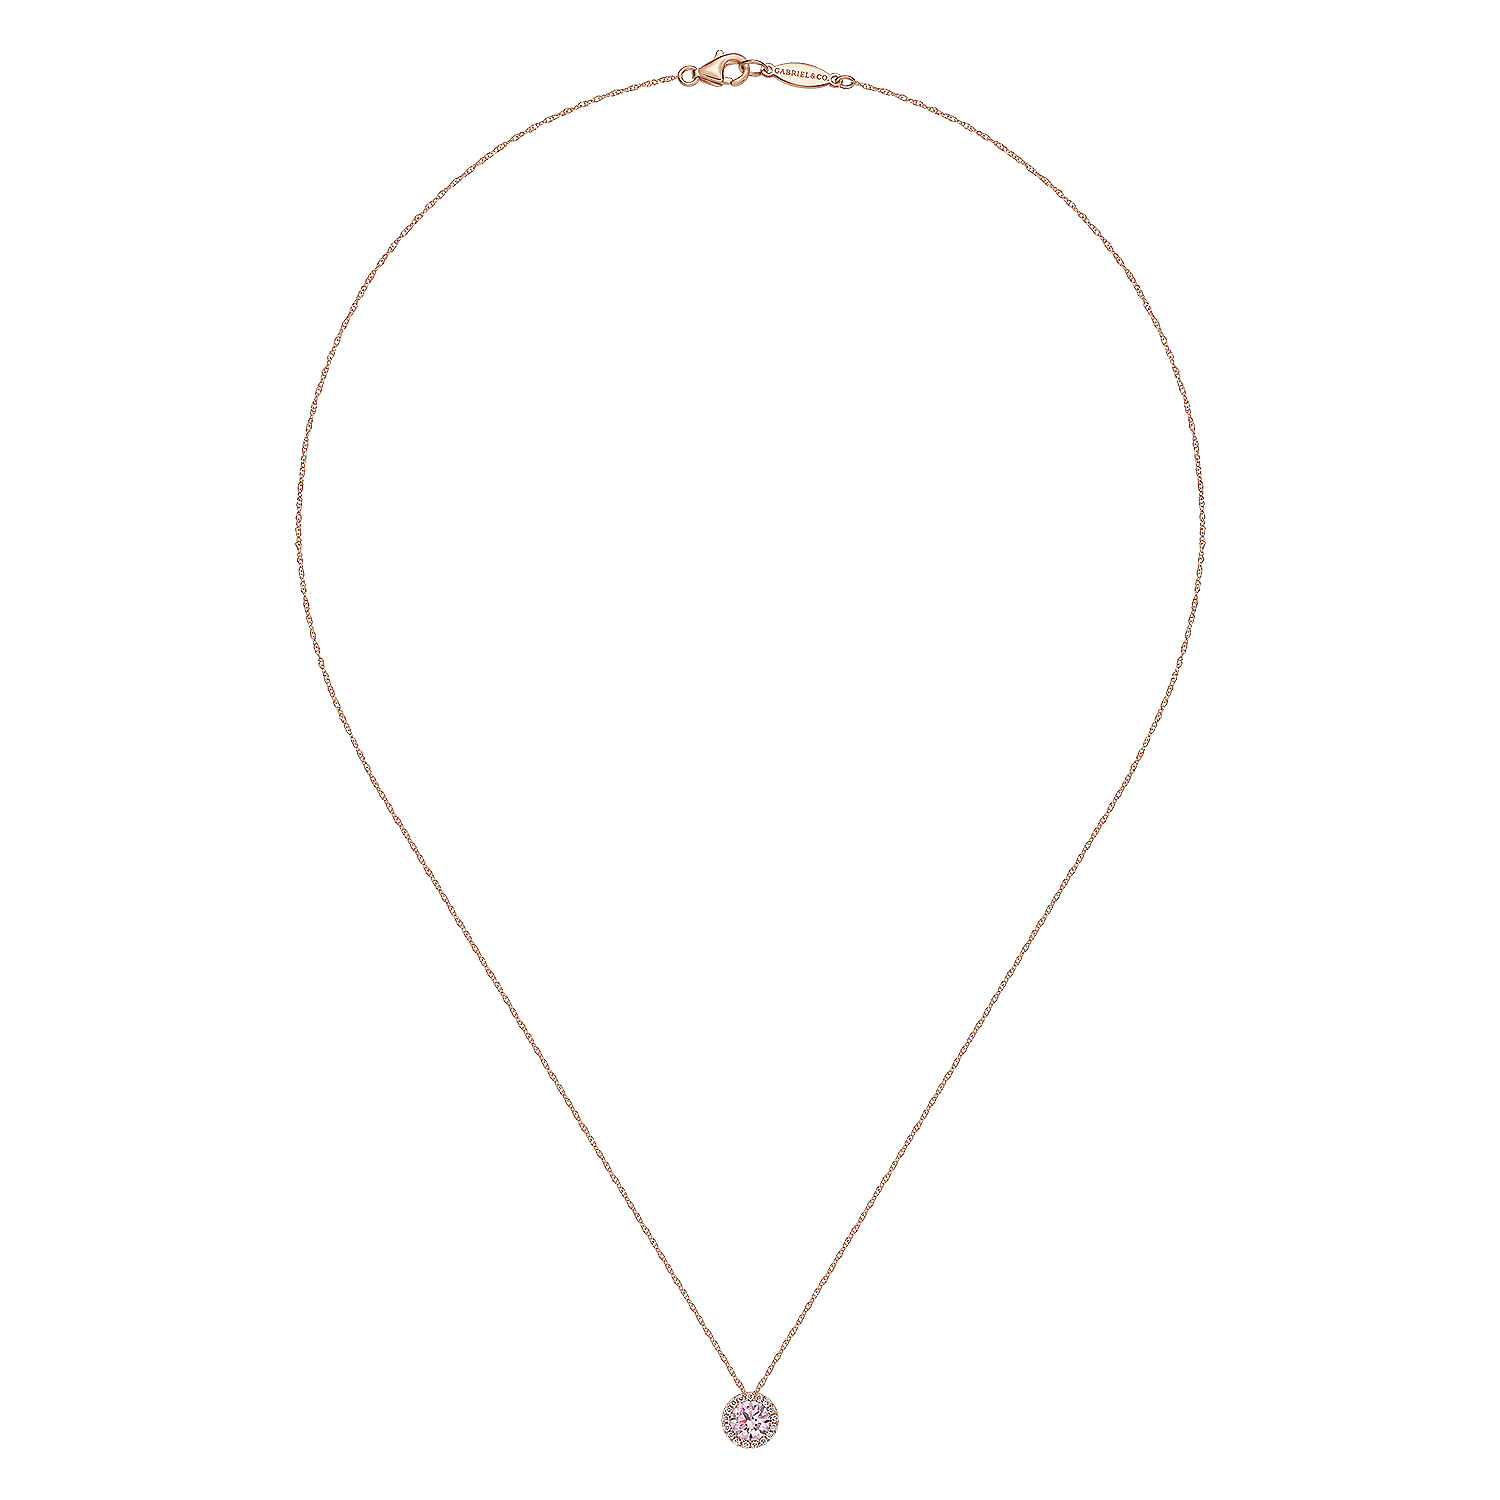 14K Rose Gold Pink Created Zircon Pendant Necklace